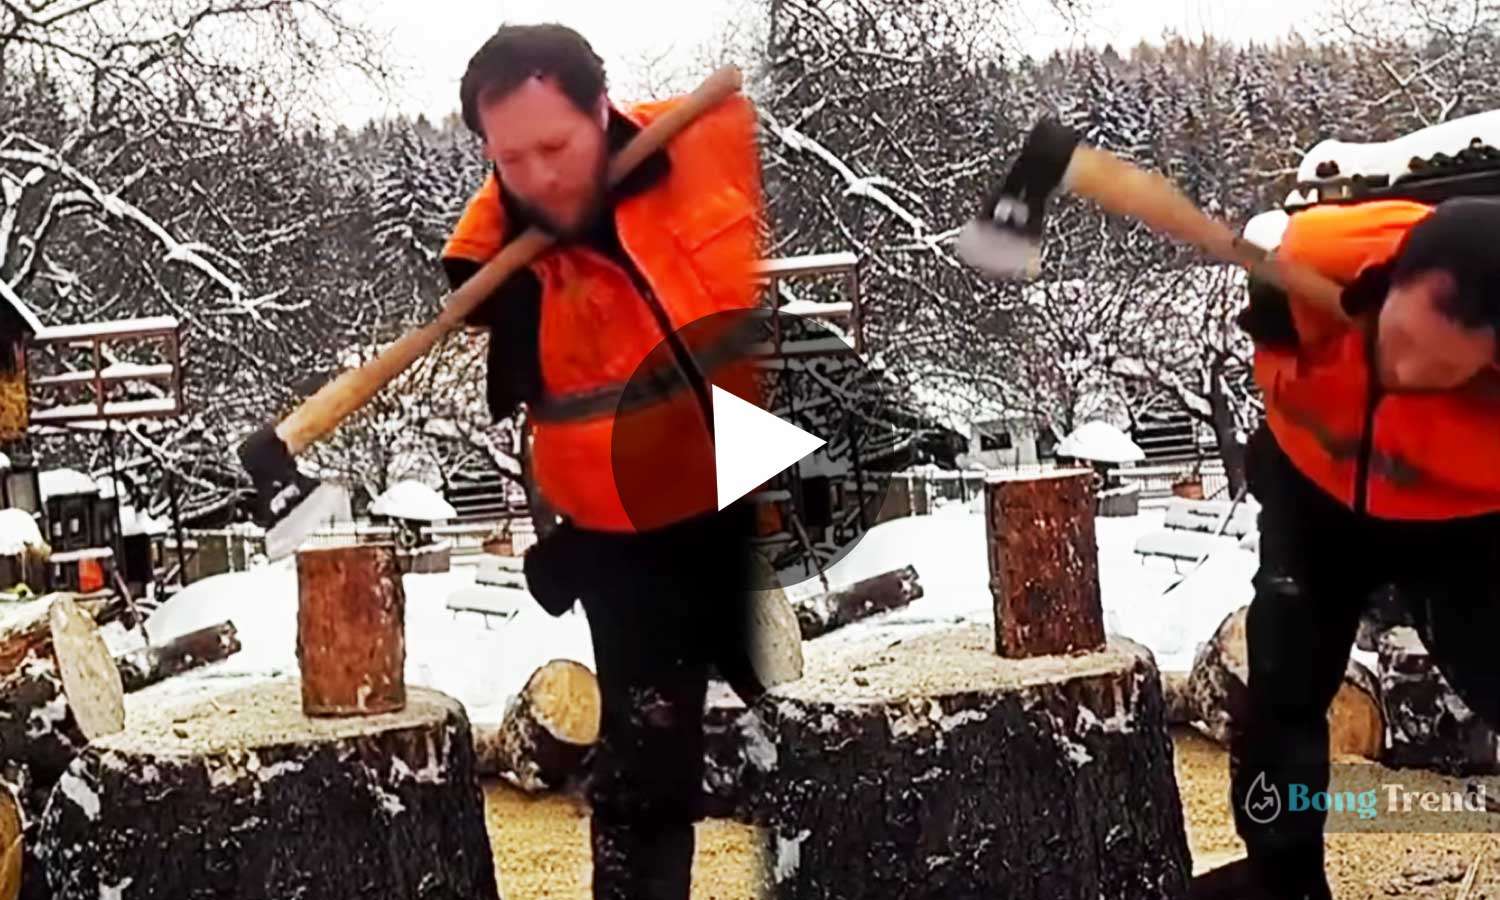 Viral Video Man without hands Cuts Wood with Axe